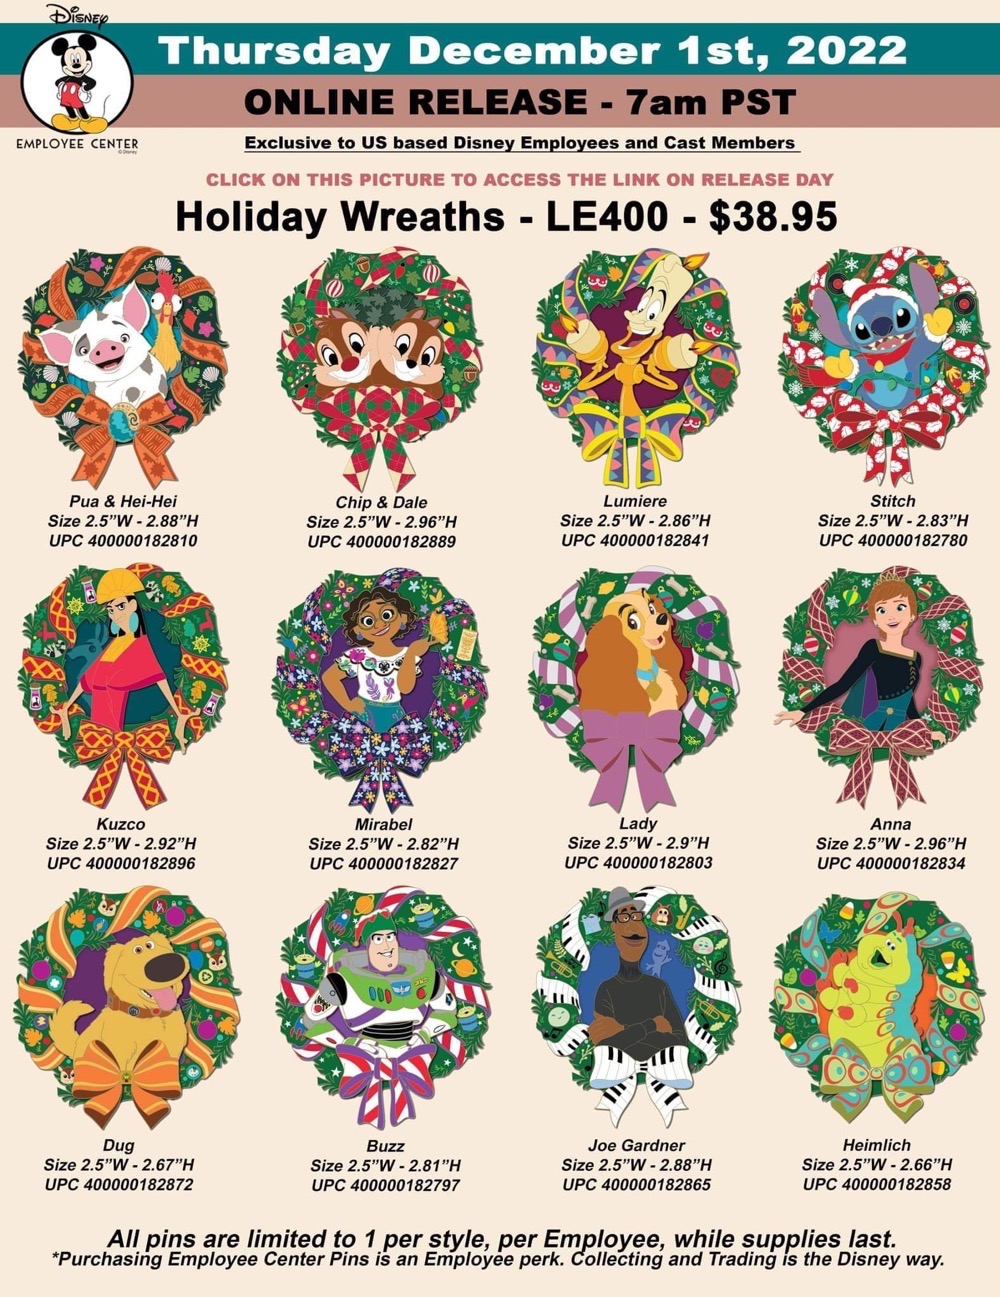 Holiday Wreaths 2022 Pins at Disney Employee Center